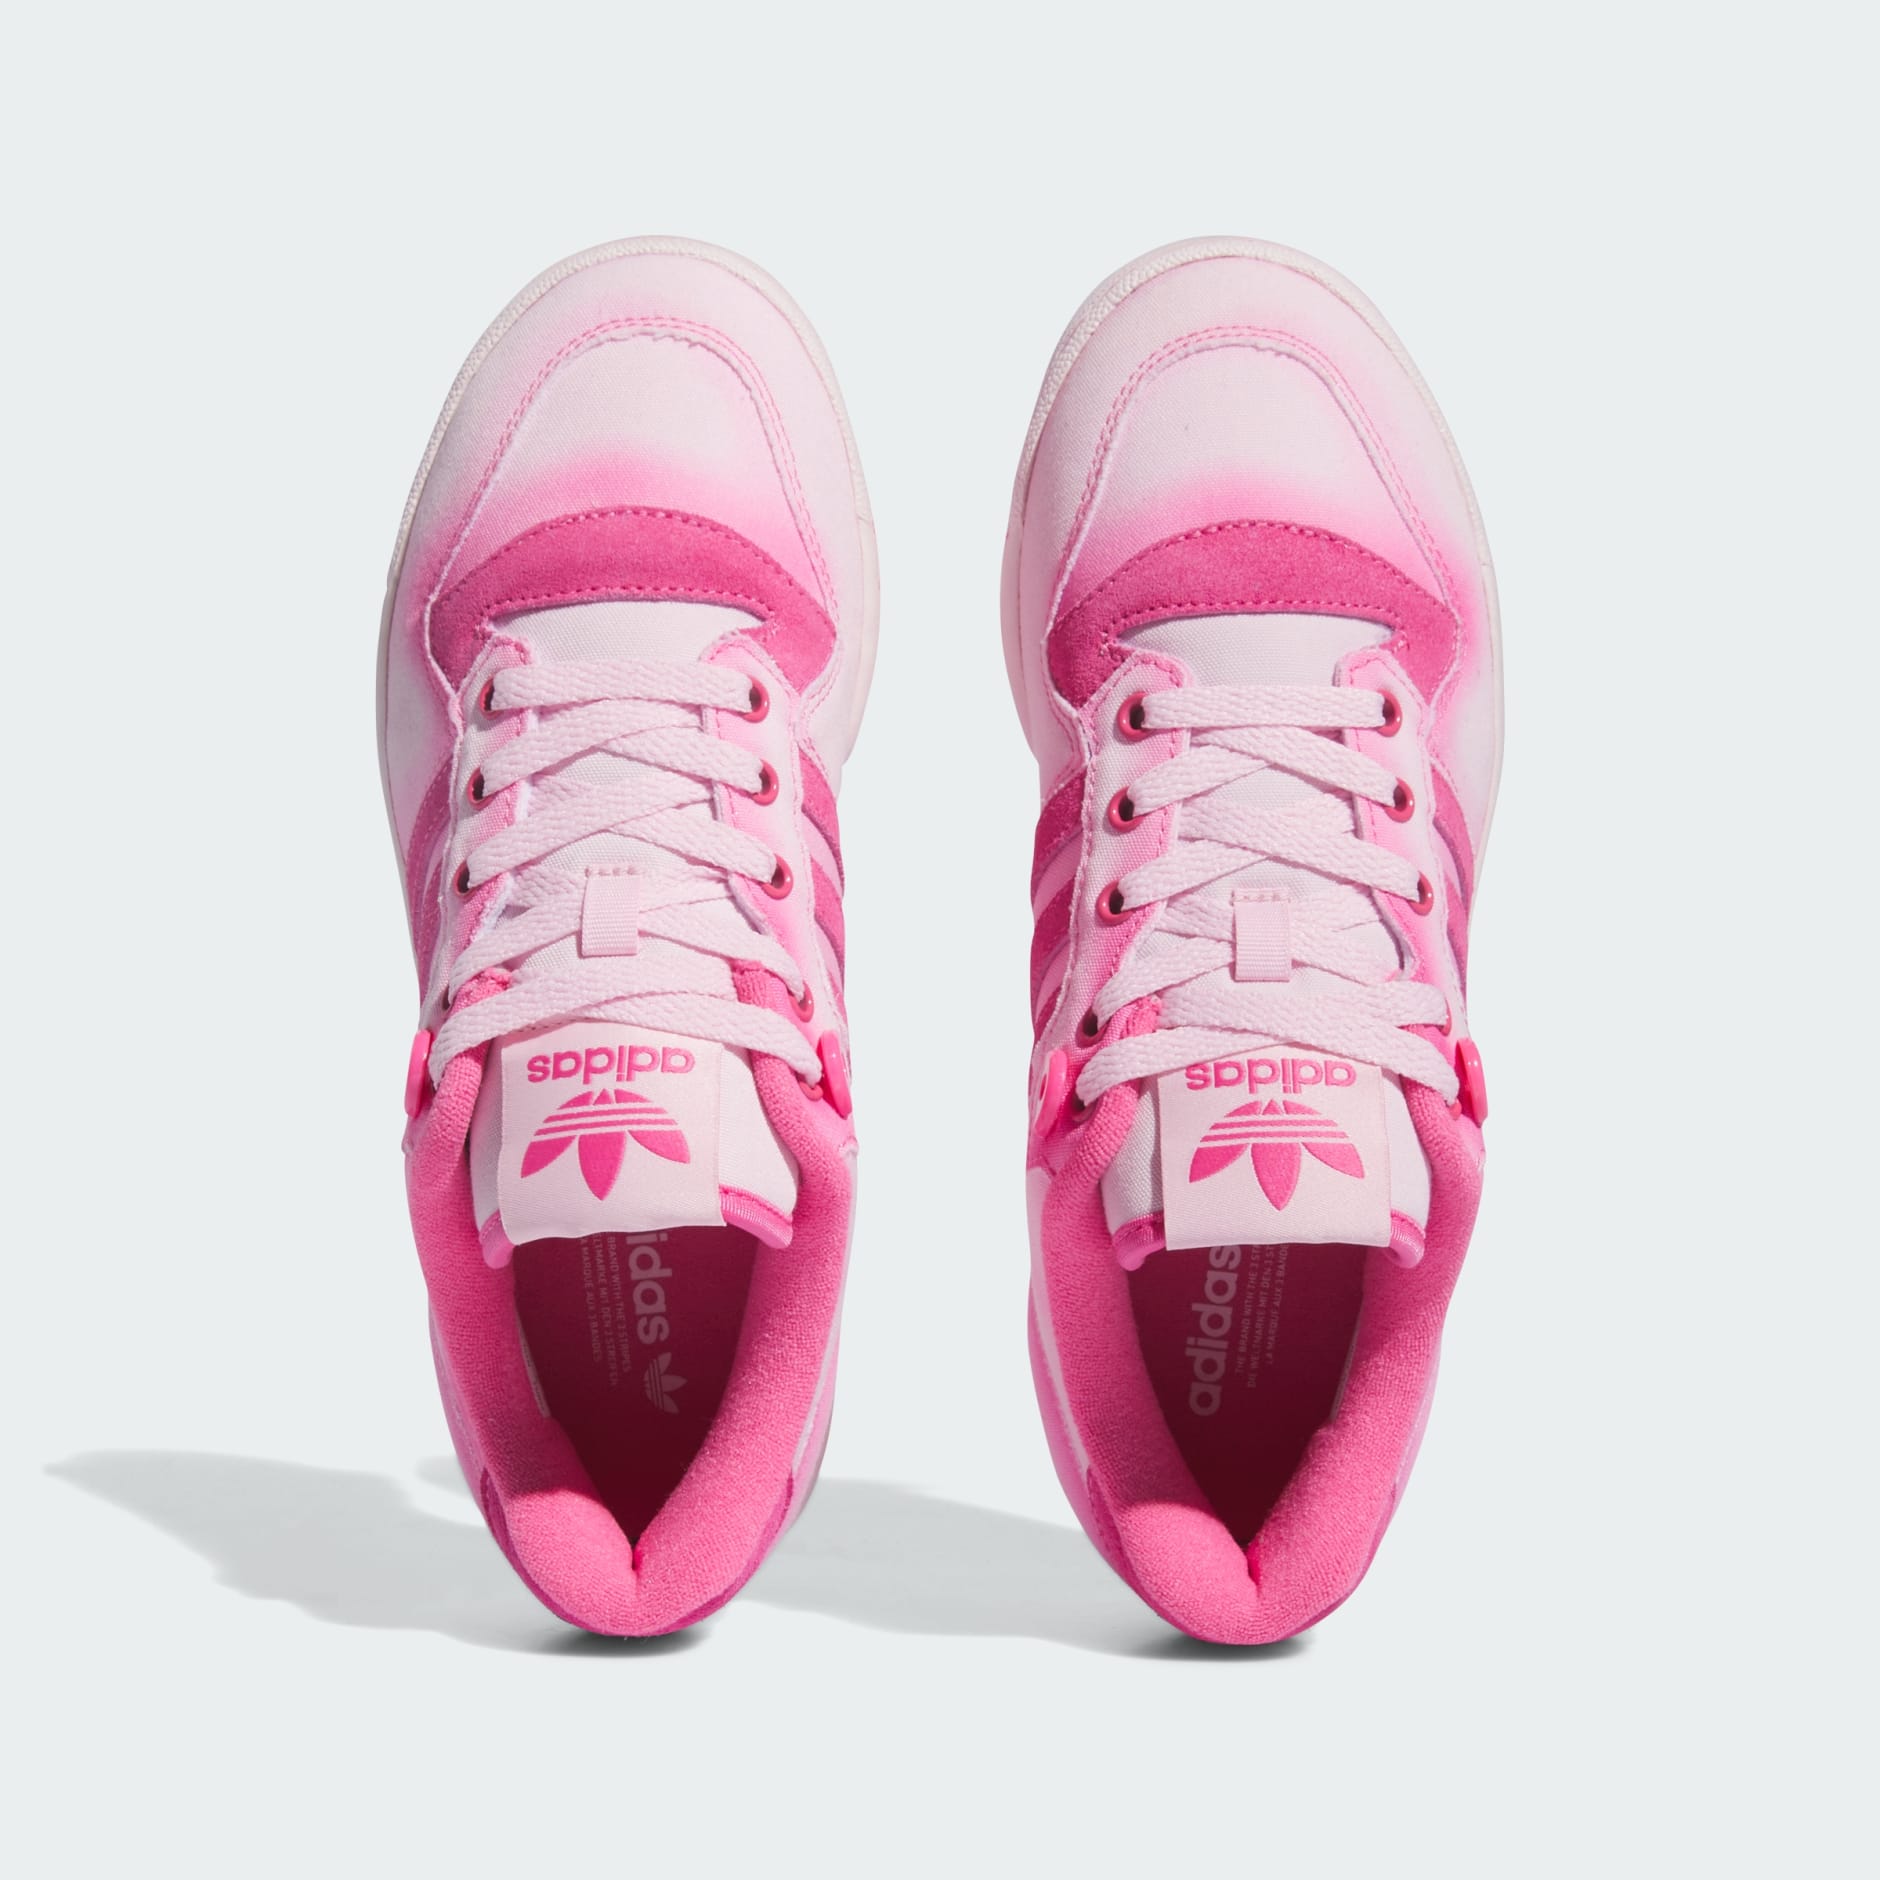 adidas Rivalry Low Shoes - Pink | adidas LK